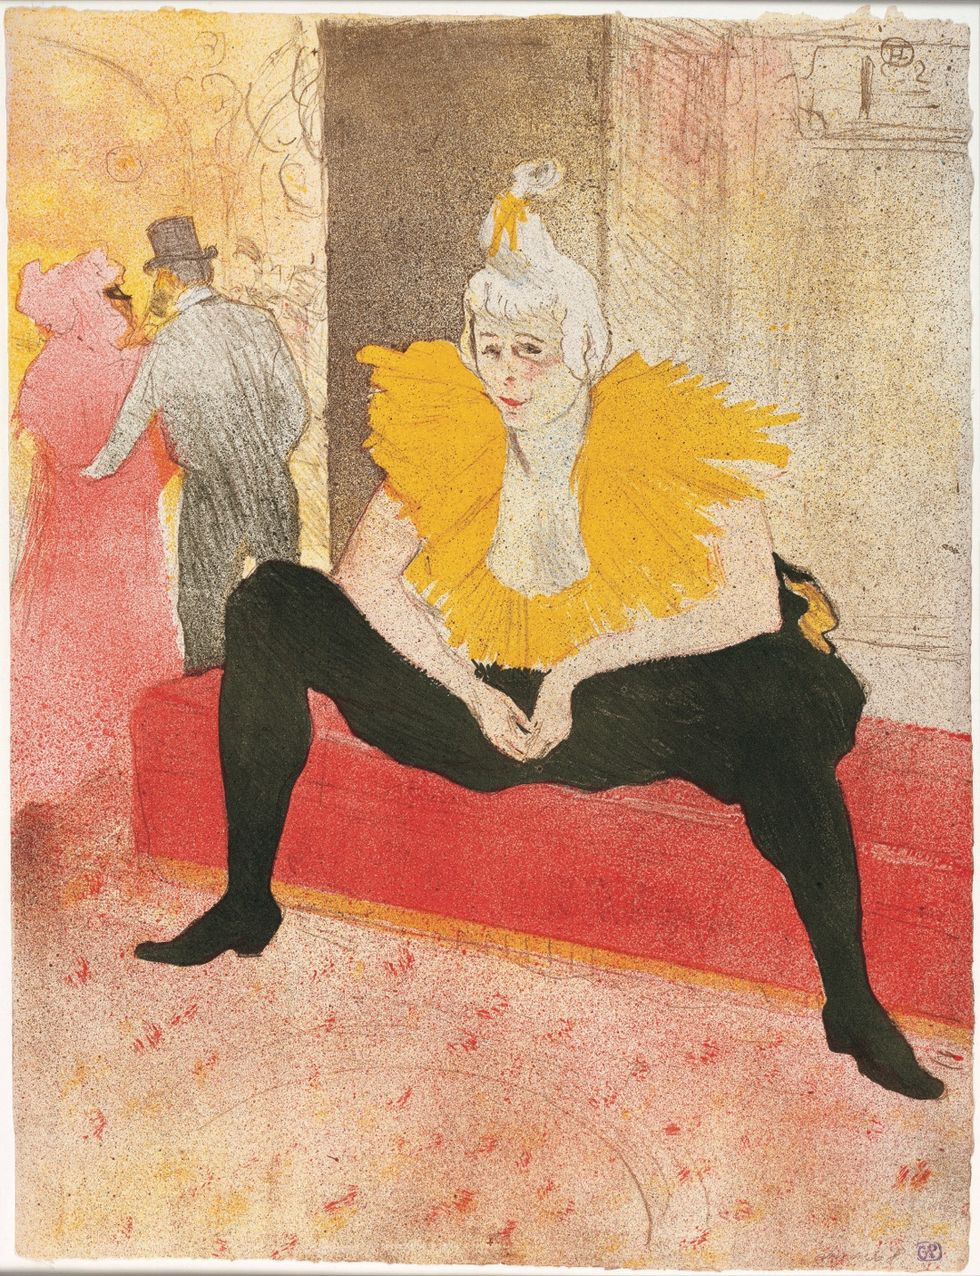 Toulouse-Lautrec in mostra a Milano